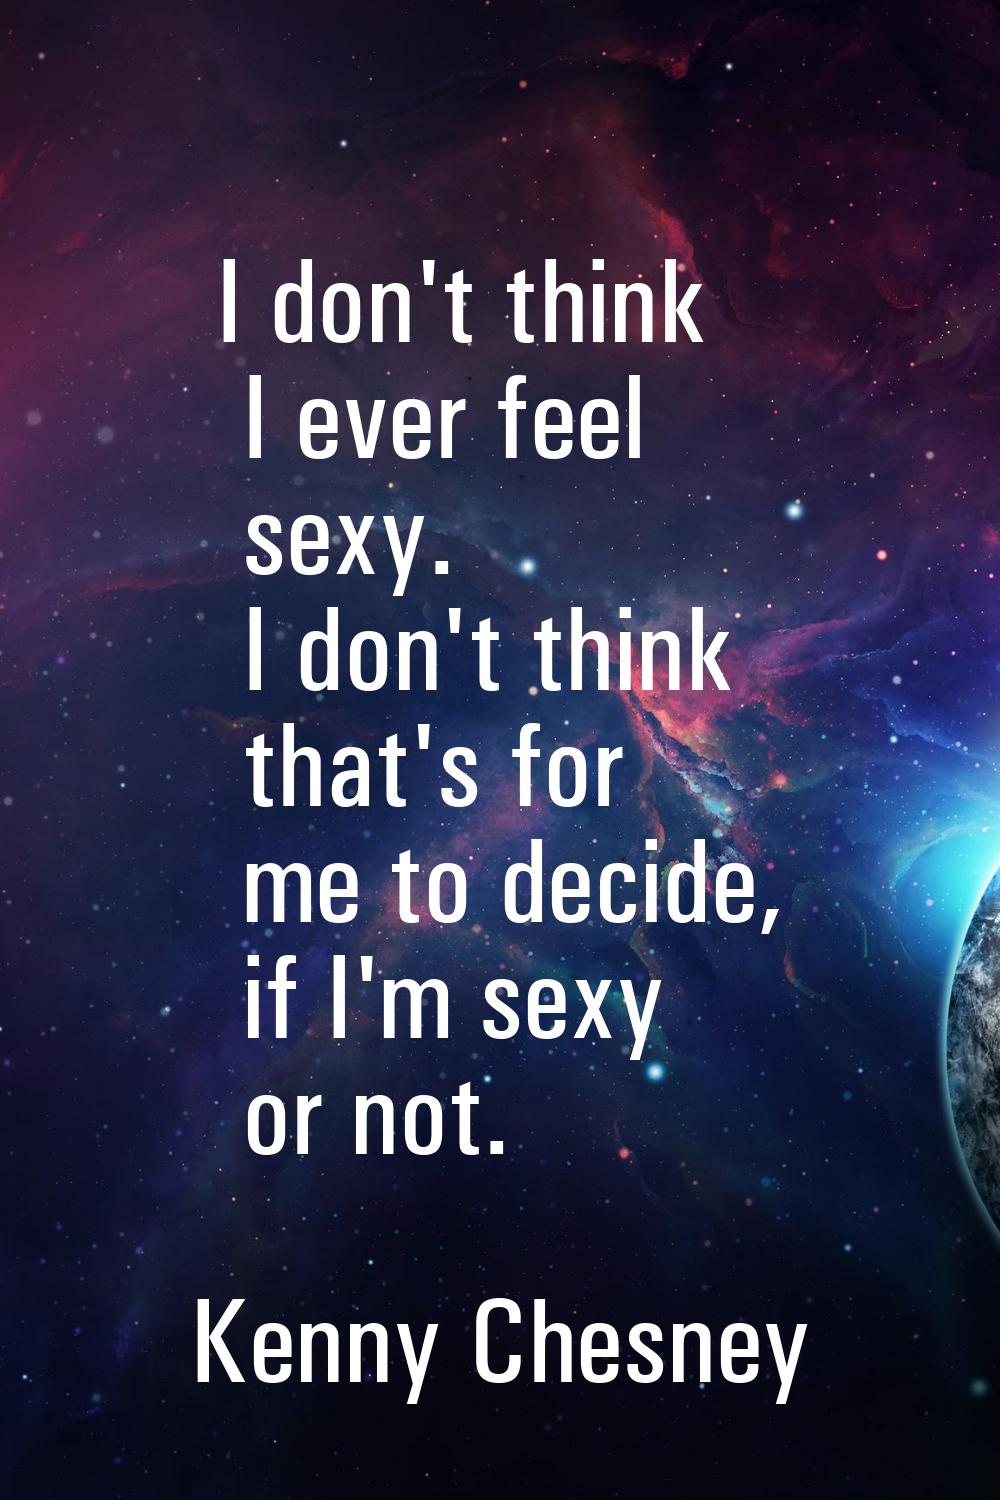 I don't think I ever feel sexy. I don't think that's for me to decide, if I'm sexy or not.